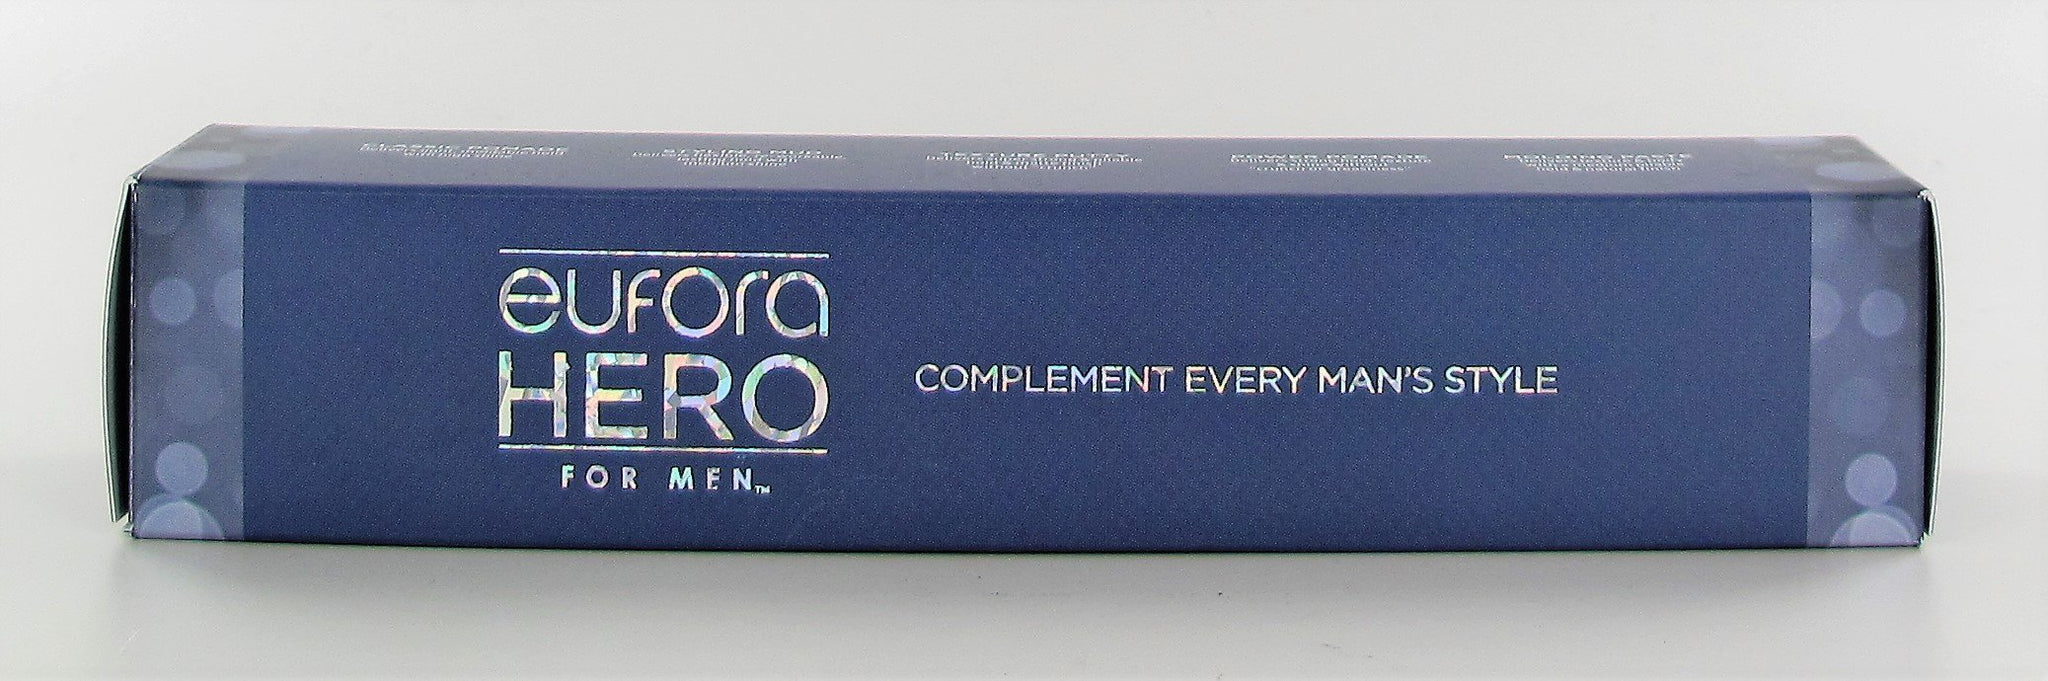 EUFORA Hero For Men Complement Every Man's Style Gift Set